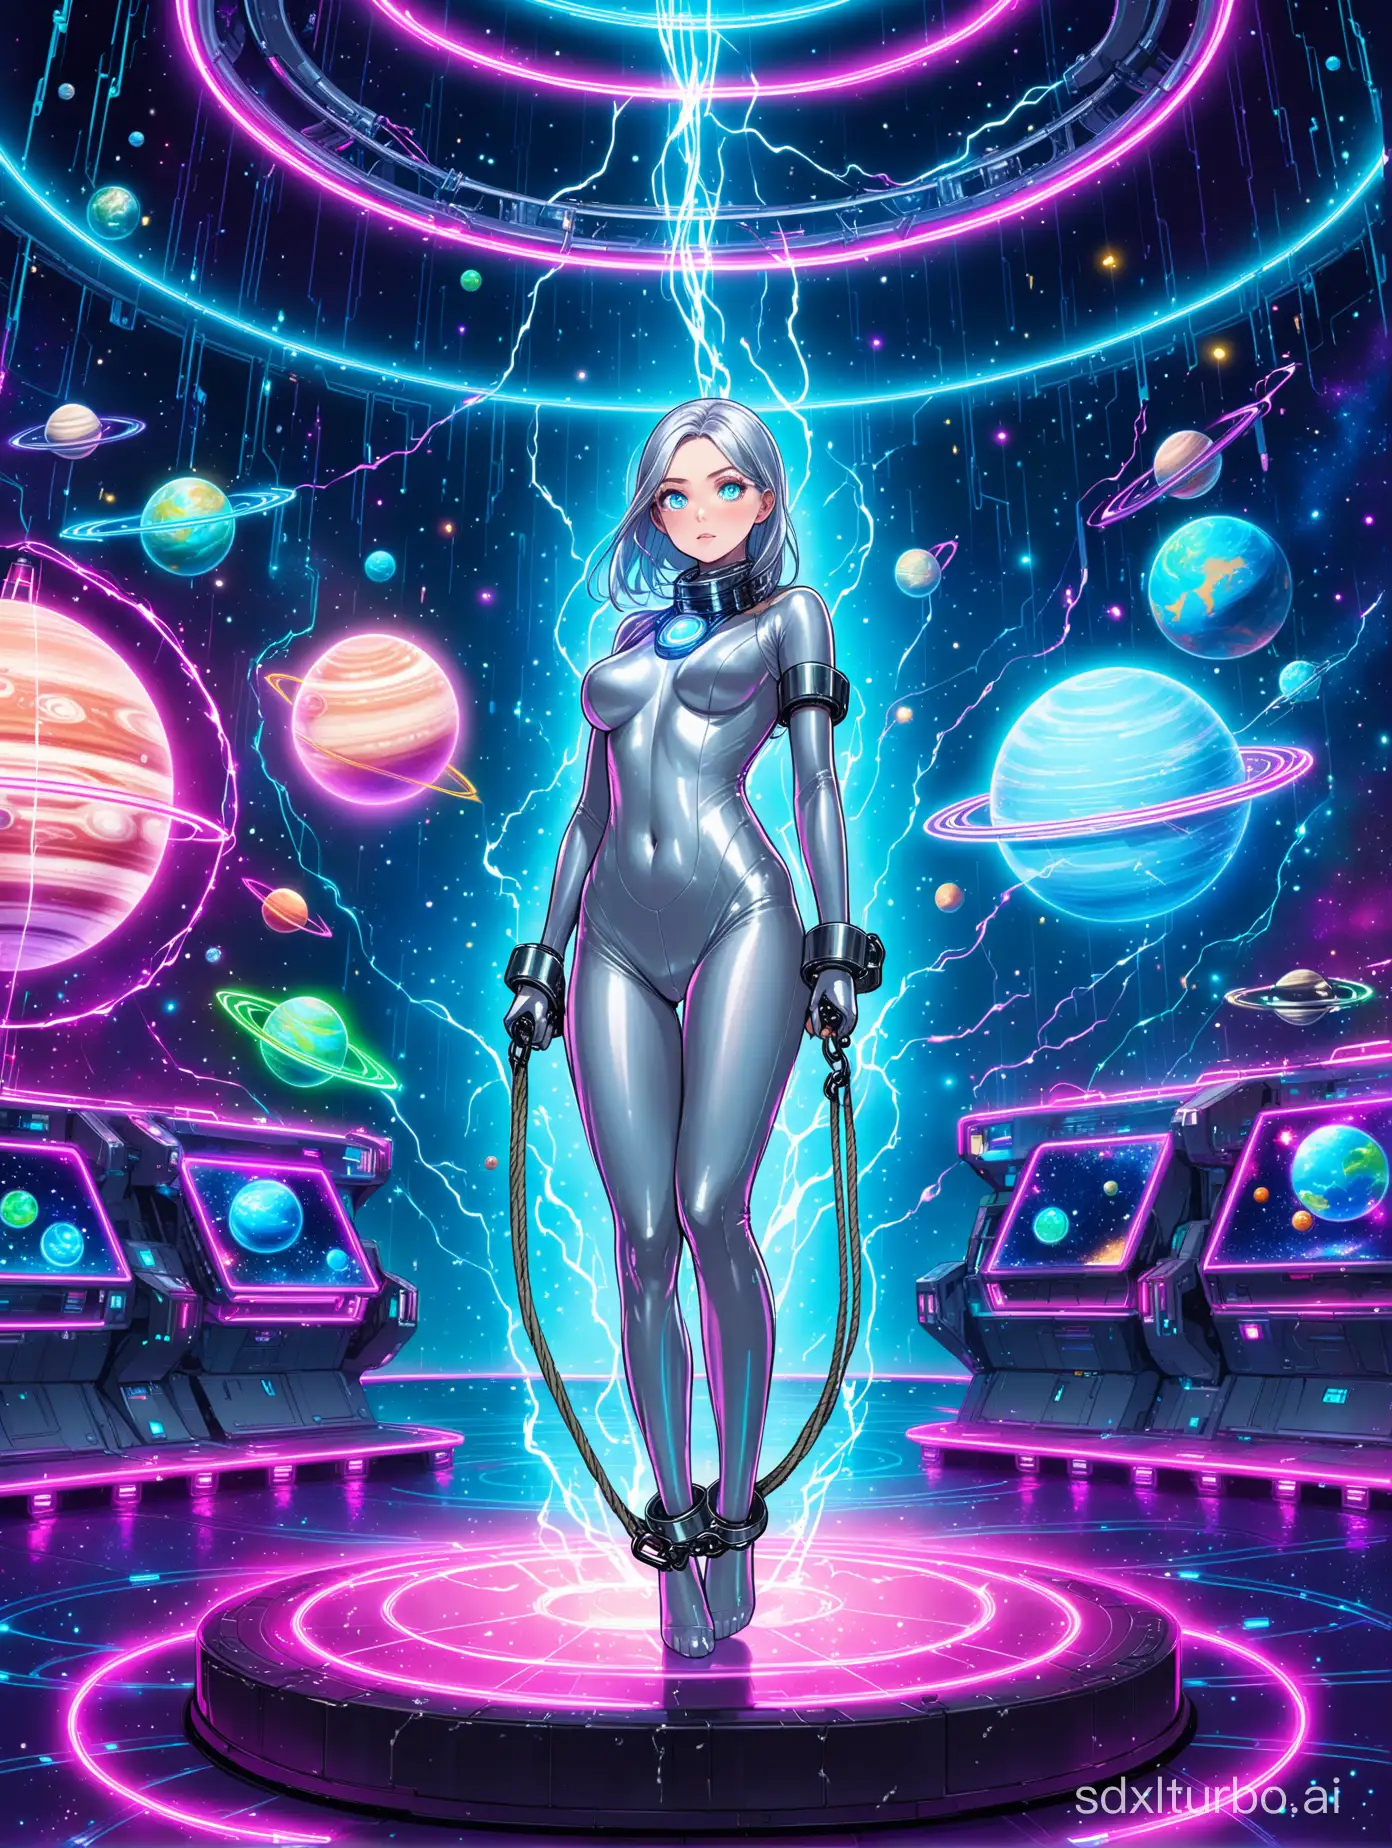 A futuristic setting with a woman in a tight silver bodysuit, handcuffs, and a rope around her neck. She has large blue robot eyes, and they are filled with sparks of electricity that look like cum. She is standing on a platform surrounded by neon lights and holographic images of planets and galaxies.